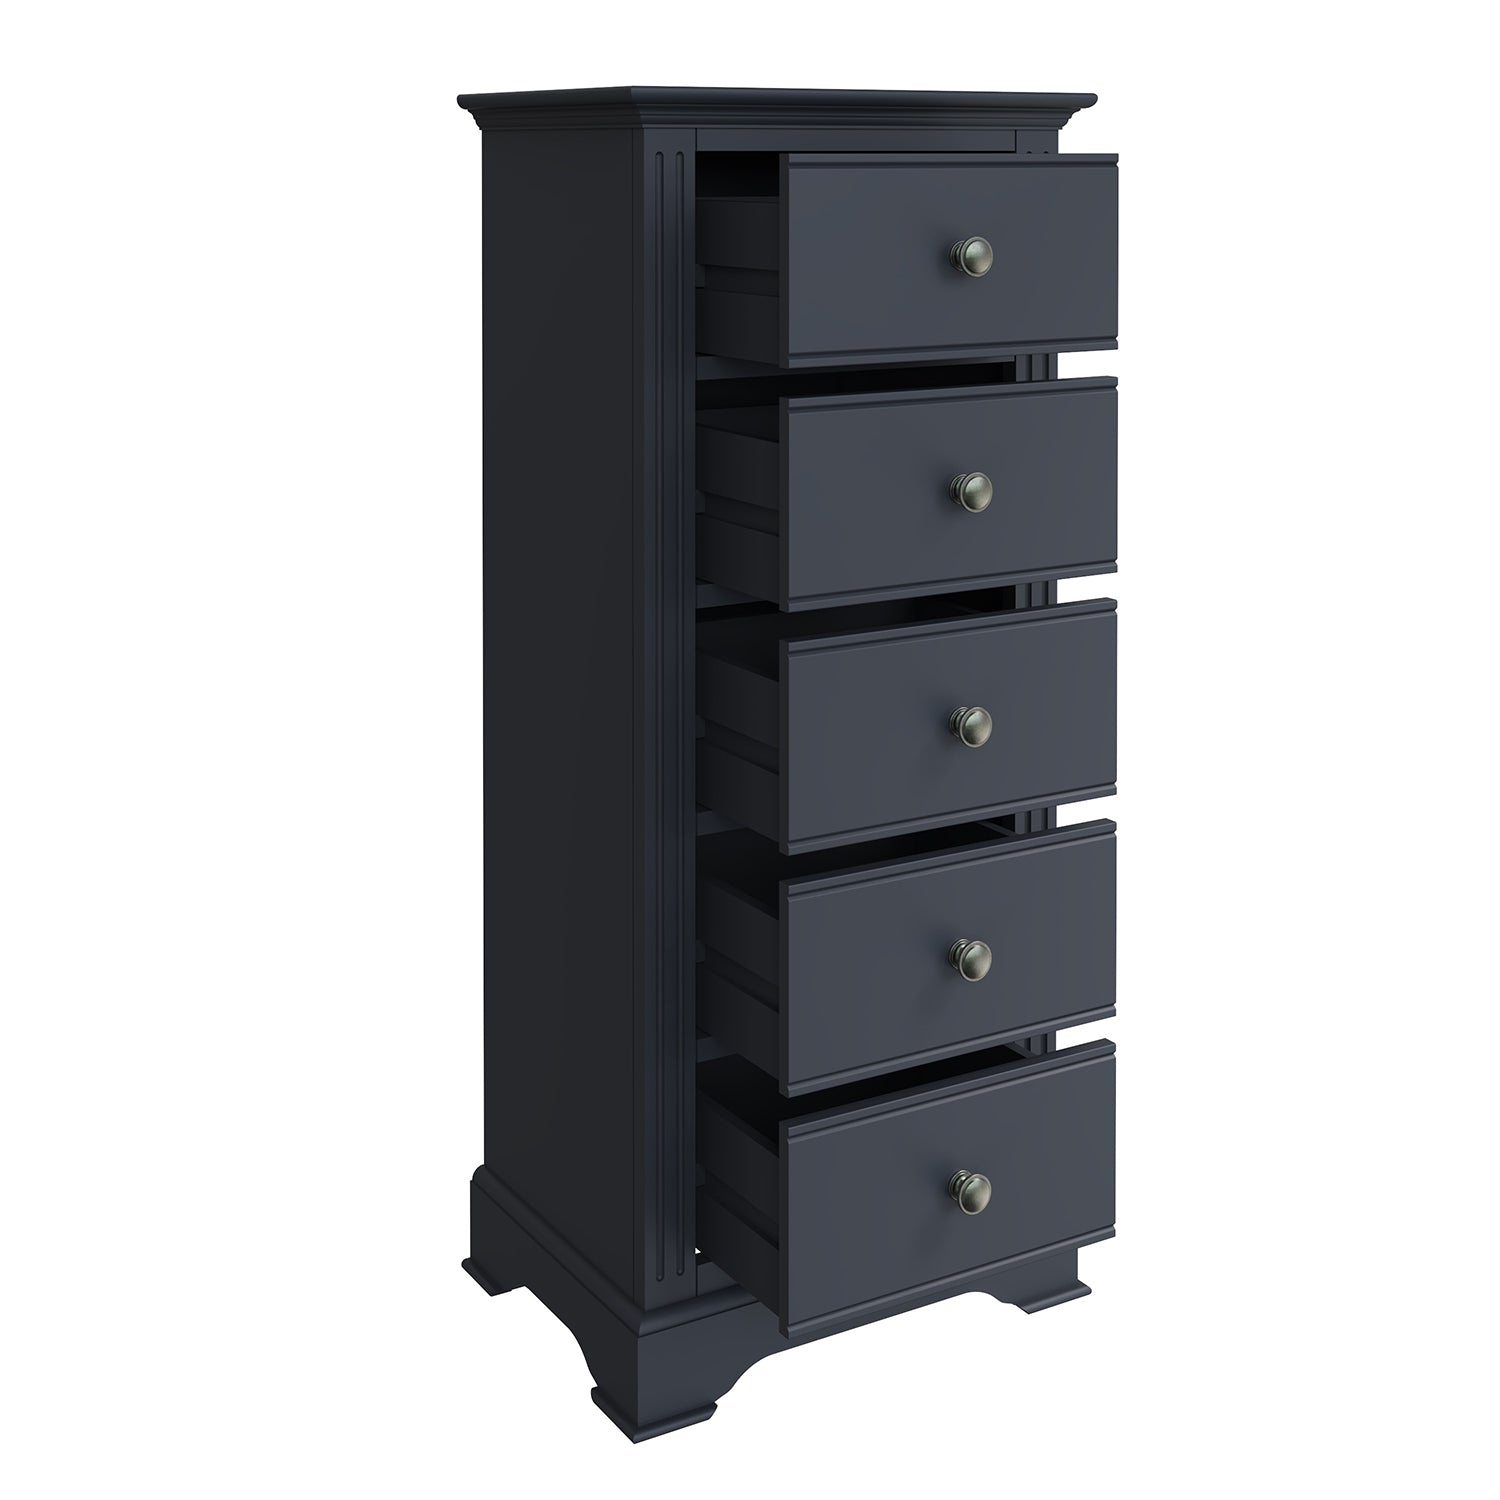 Billingford Charcoal Chest of Drawers - 5 Drawer Narrow